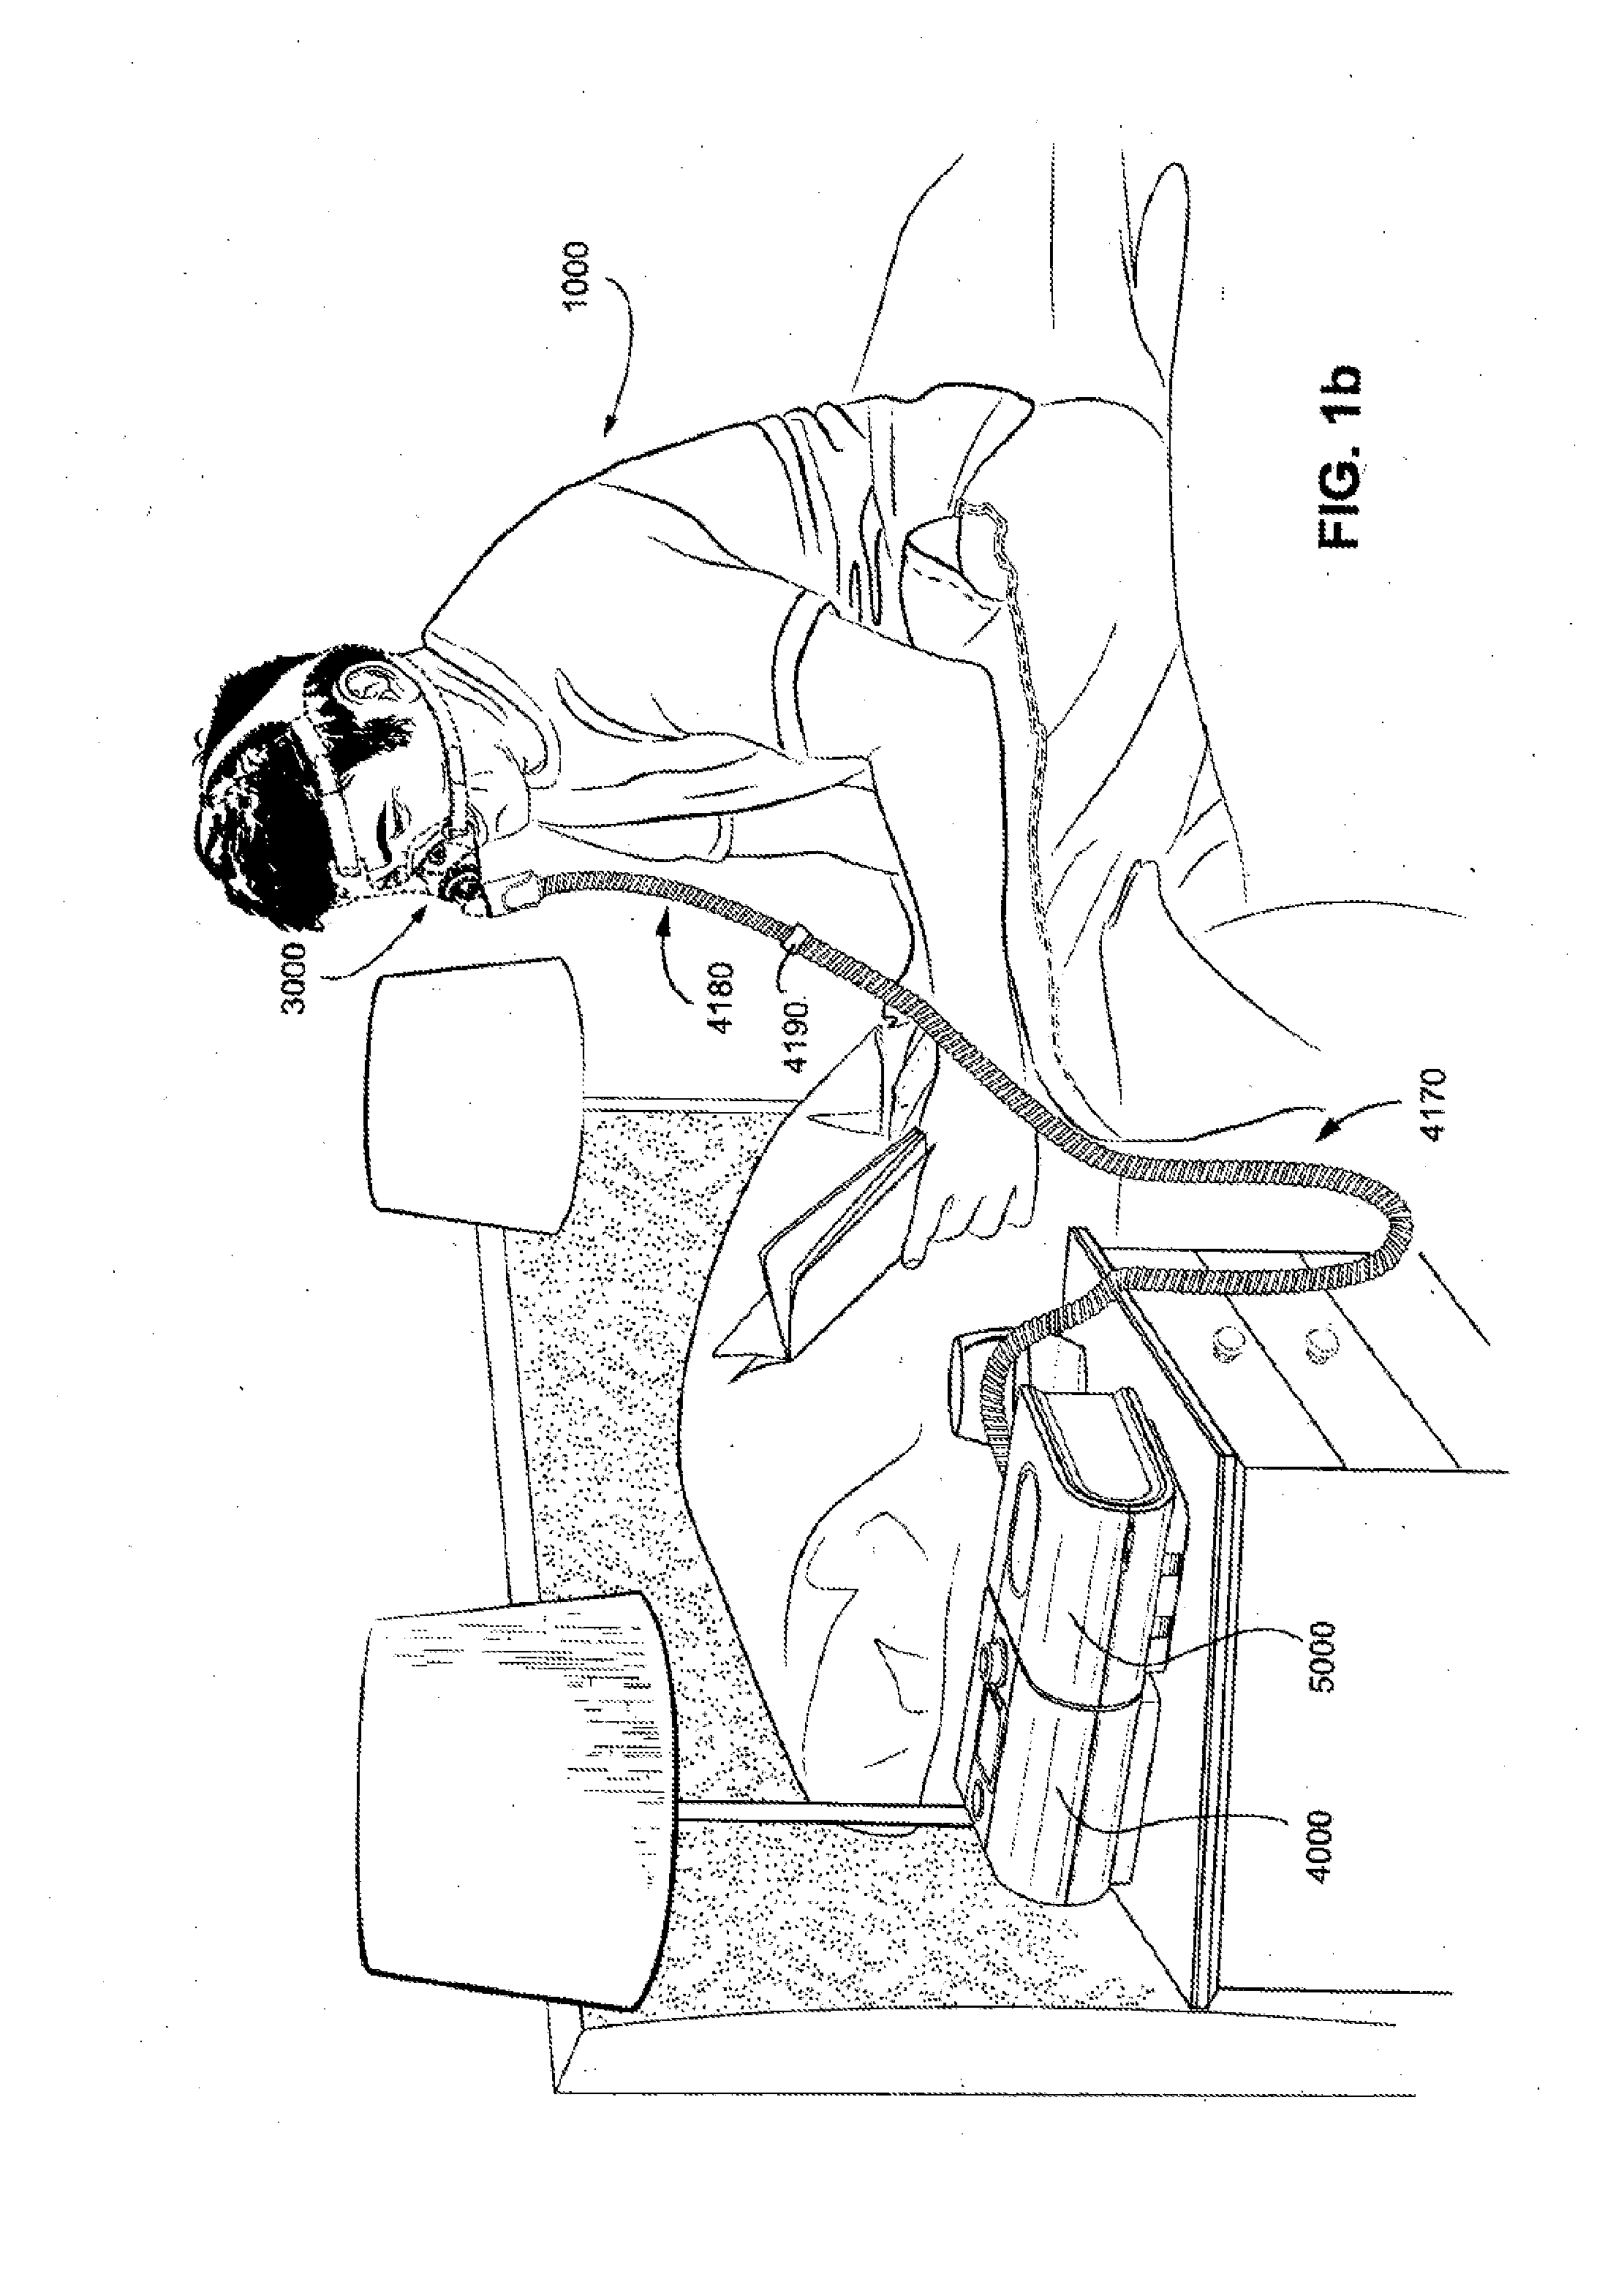 Plastic to textile coupling for a patient interface and methods of manufacturing same